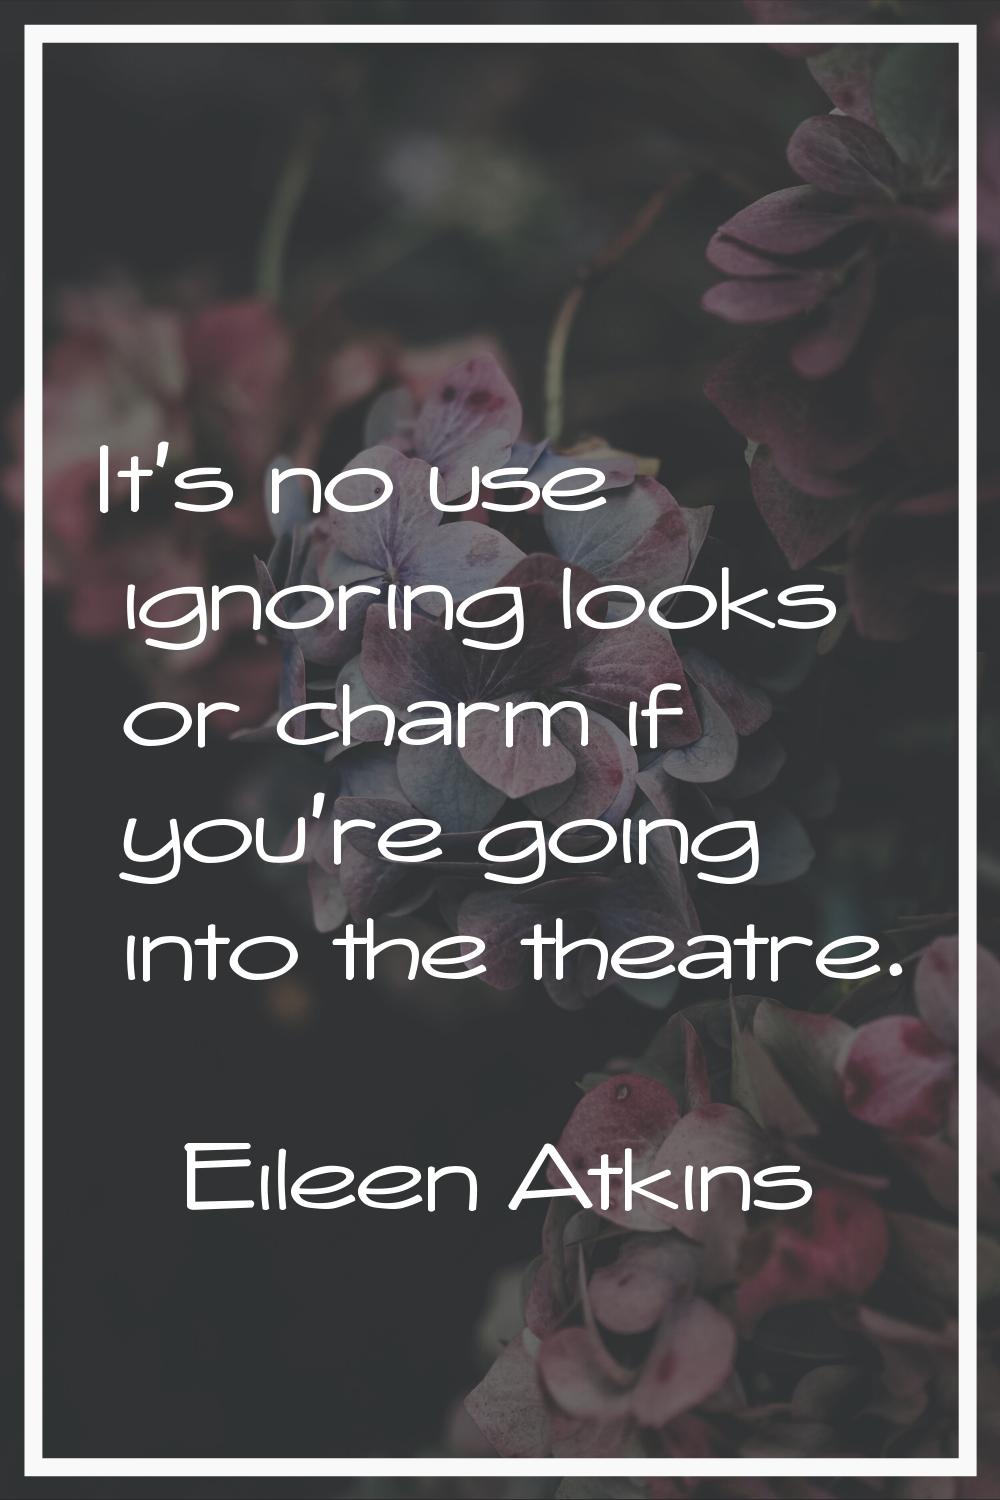 It's no use ignoring looks or charm if you're going into the theatre.